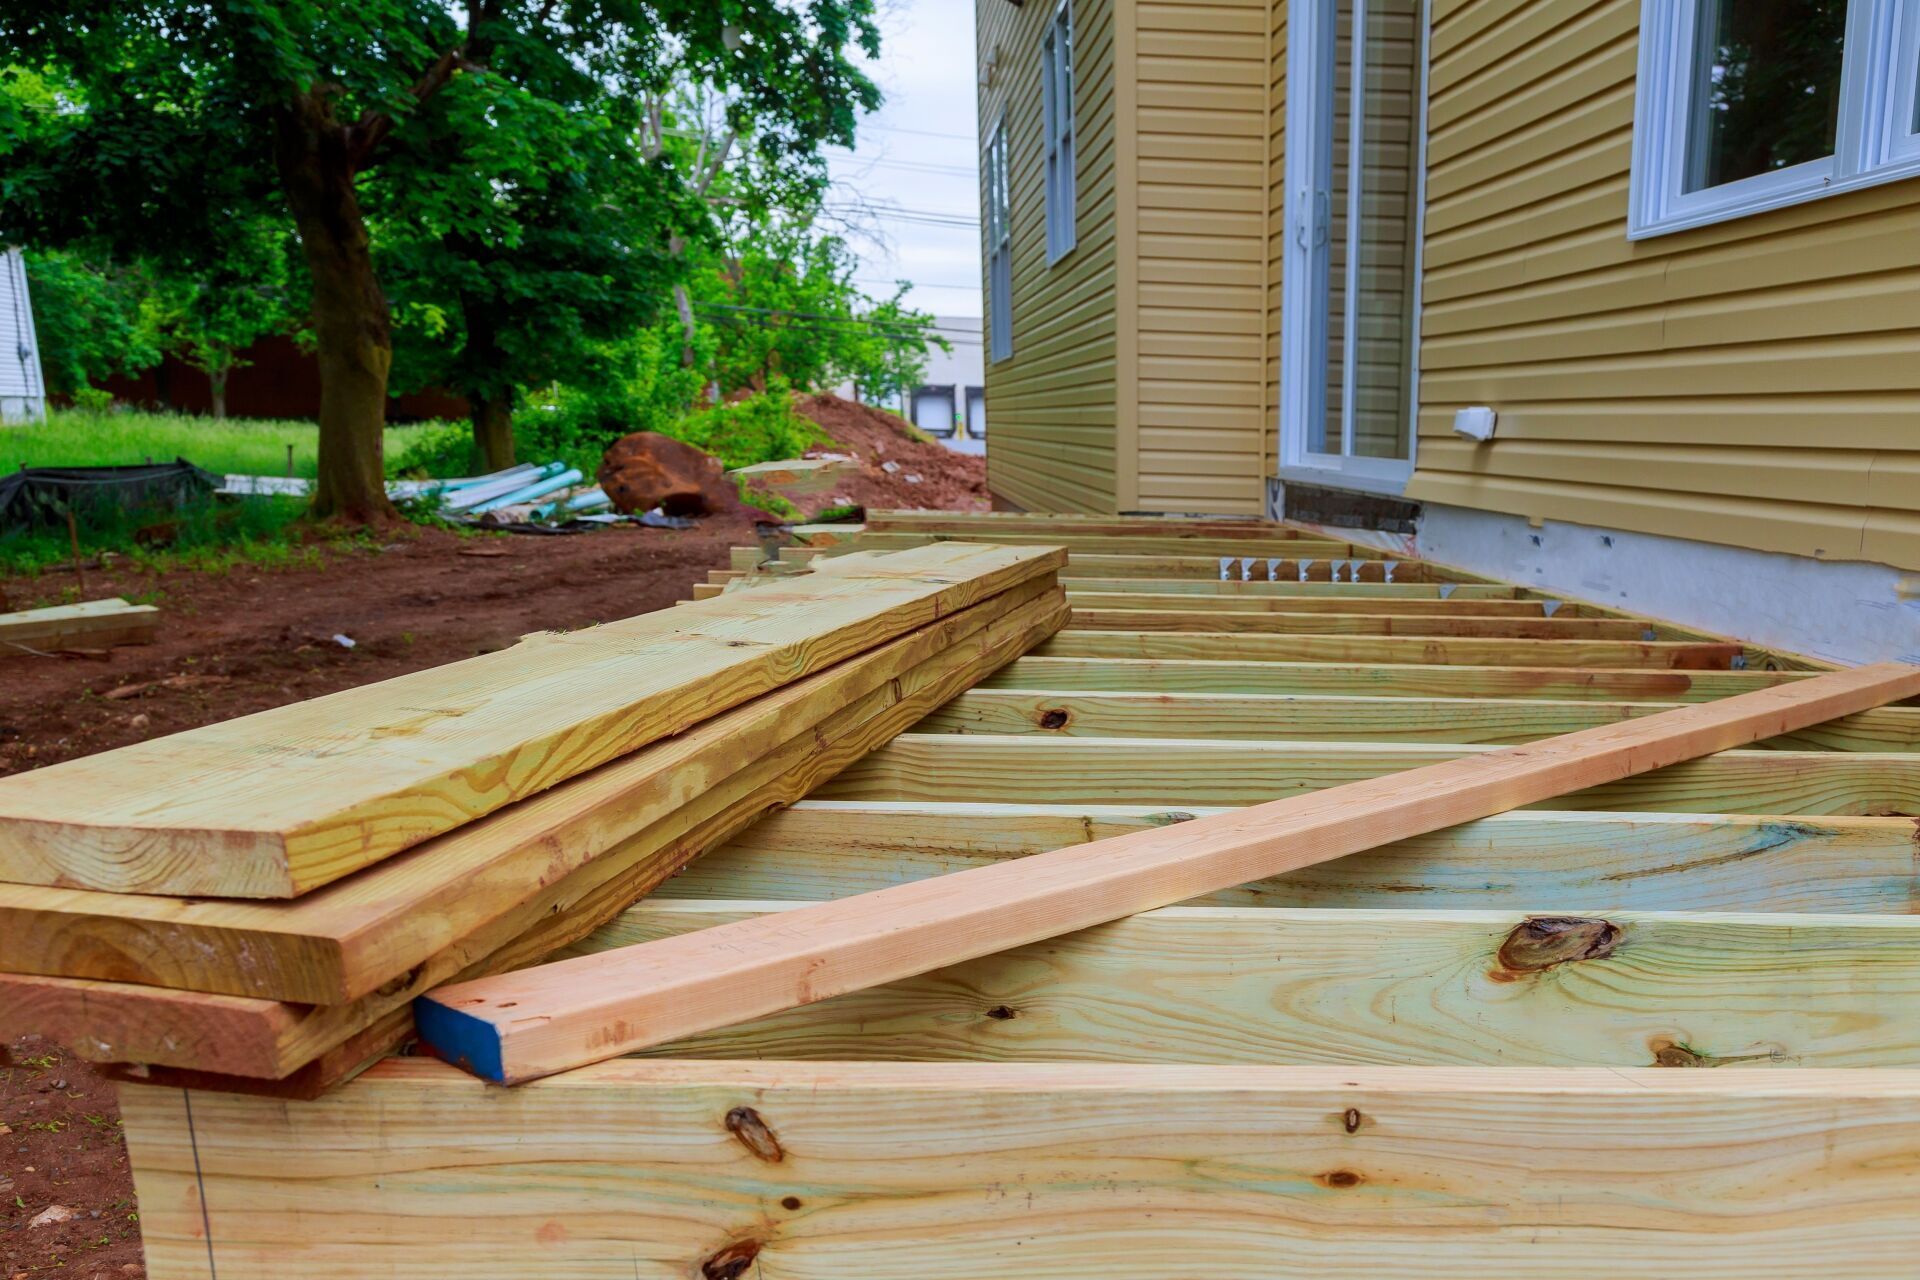 A new wooden timber deck being constructed by deck builders Greensboro NC